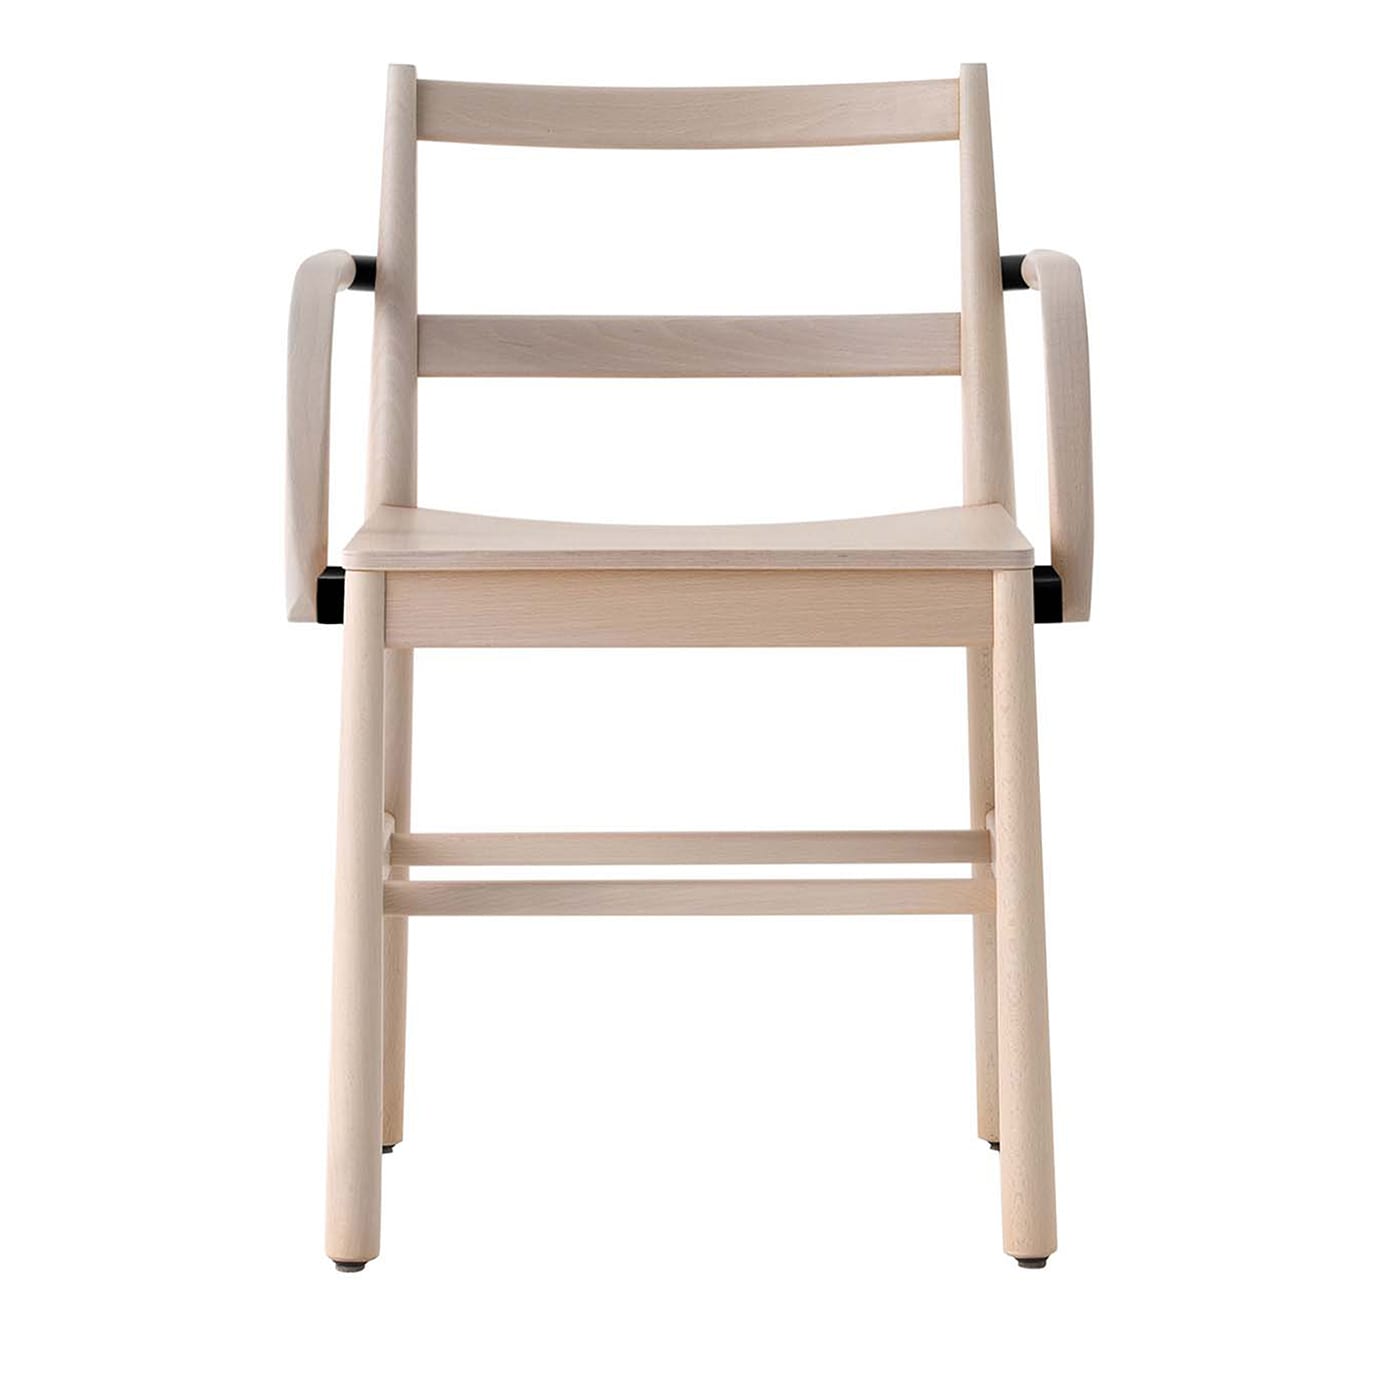 Julie Bleached Wood chair with armrests by Emilio Nanni - TrabA'